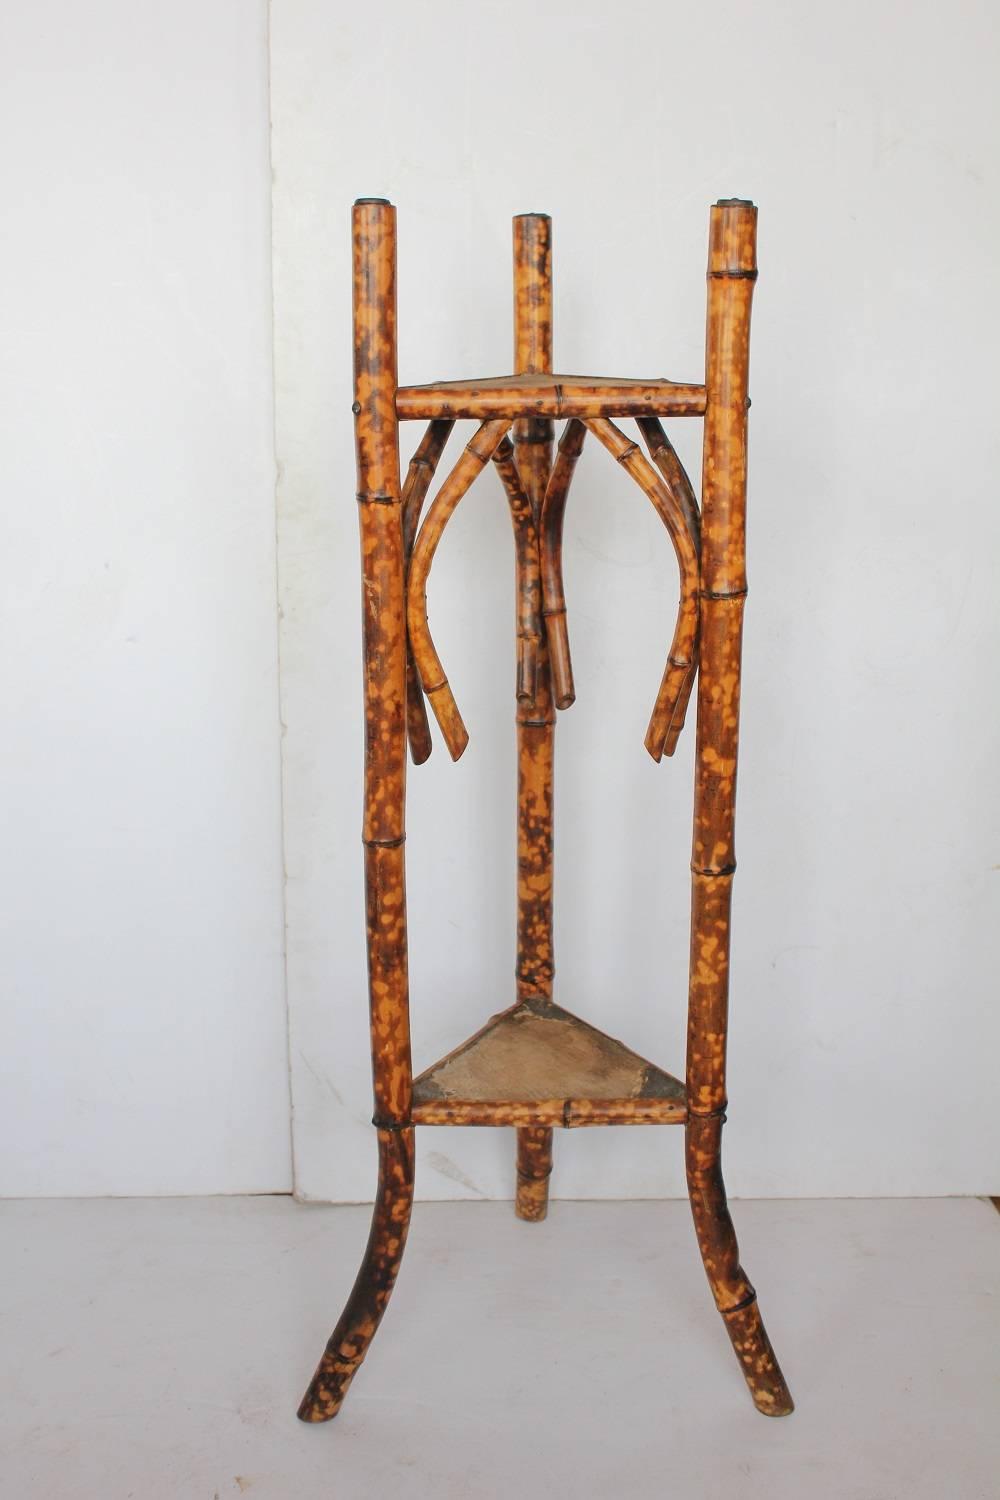 Victorian tortoise shell bamboo stand or pedestal with brass decorations. Measures: Top W 13.25